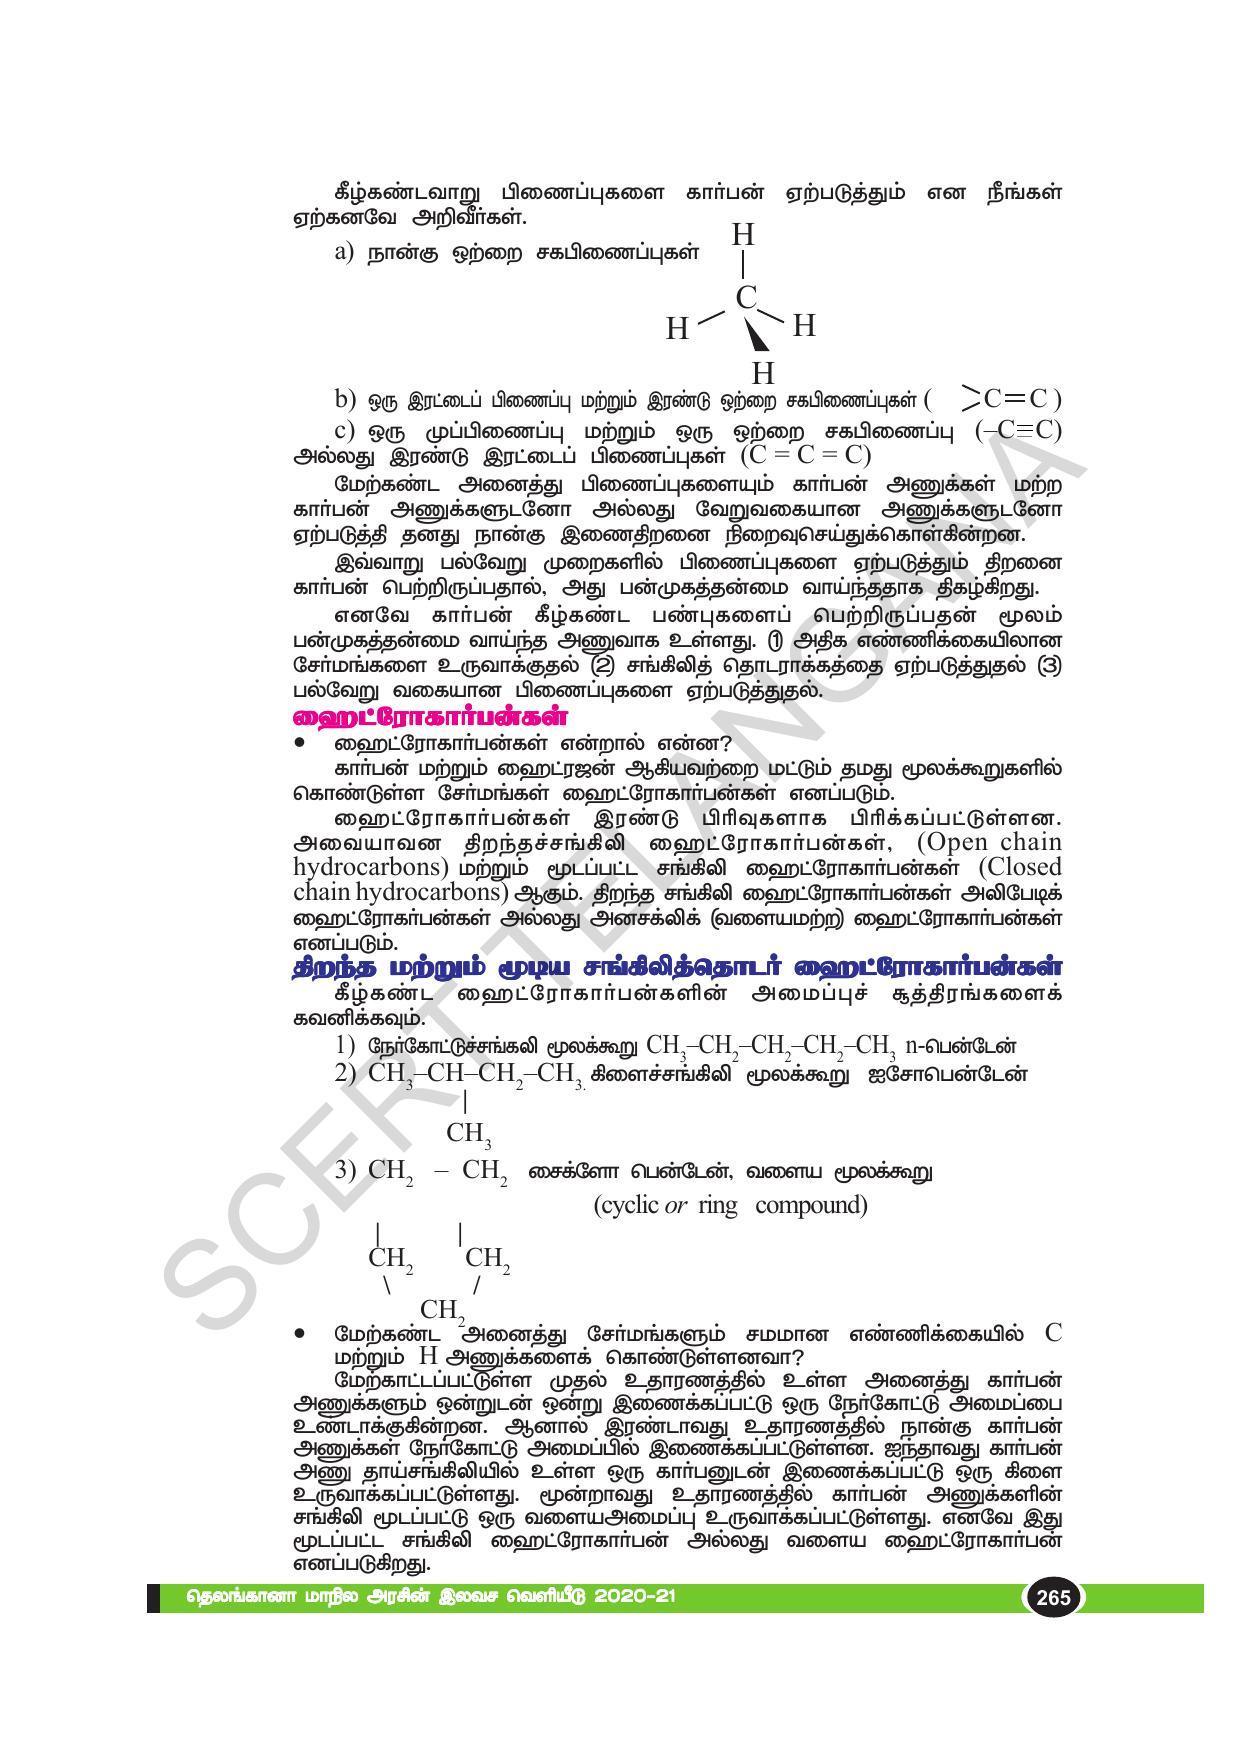 TS SCERT Class 10 Physical Science(Tamil Medium) Text Book - Page 277